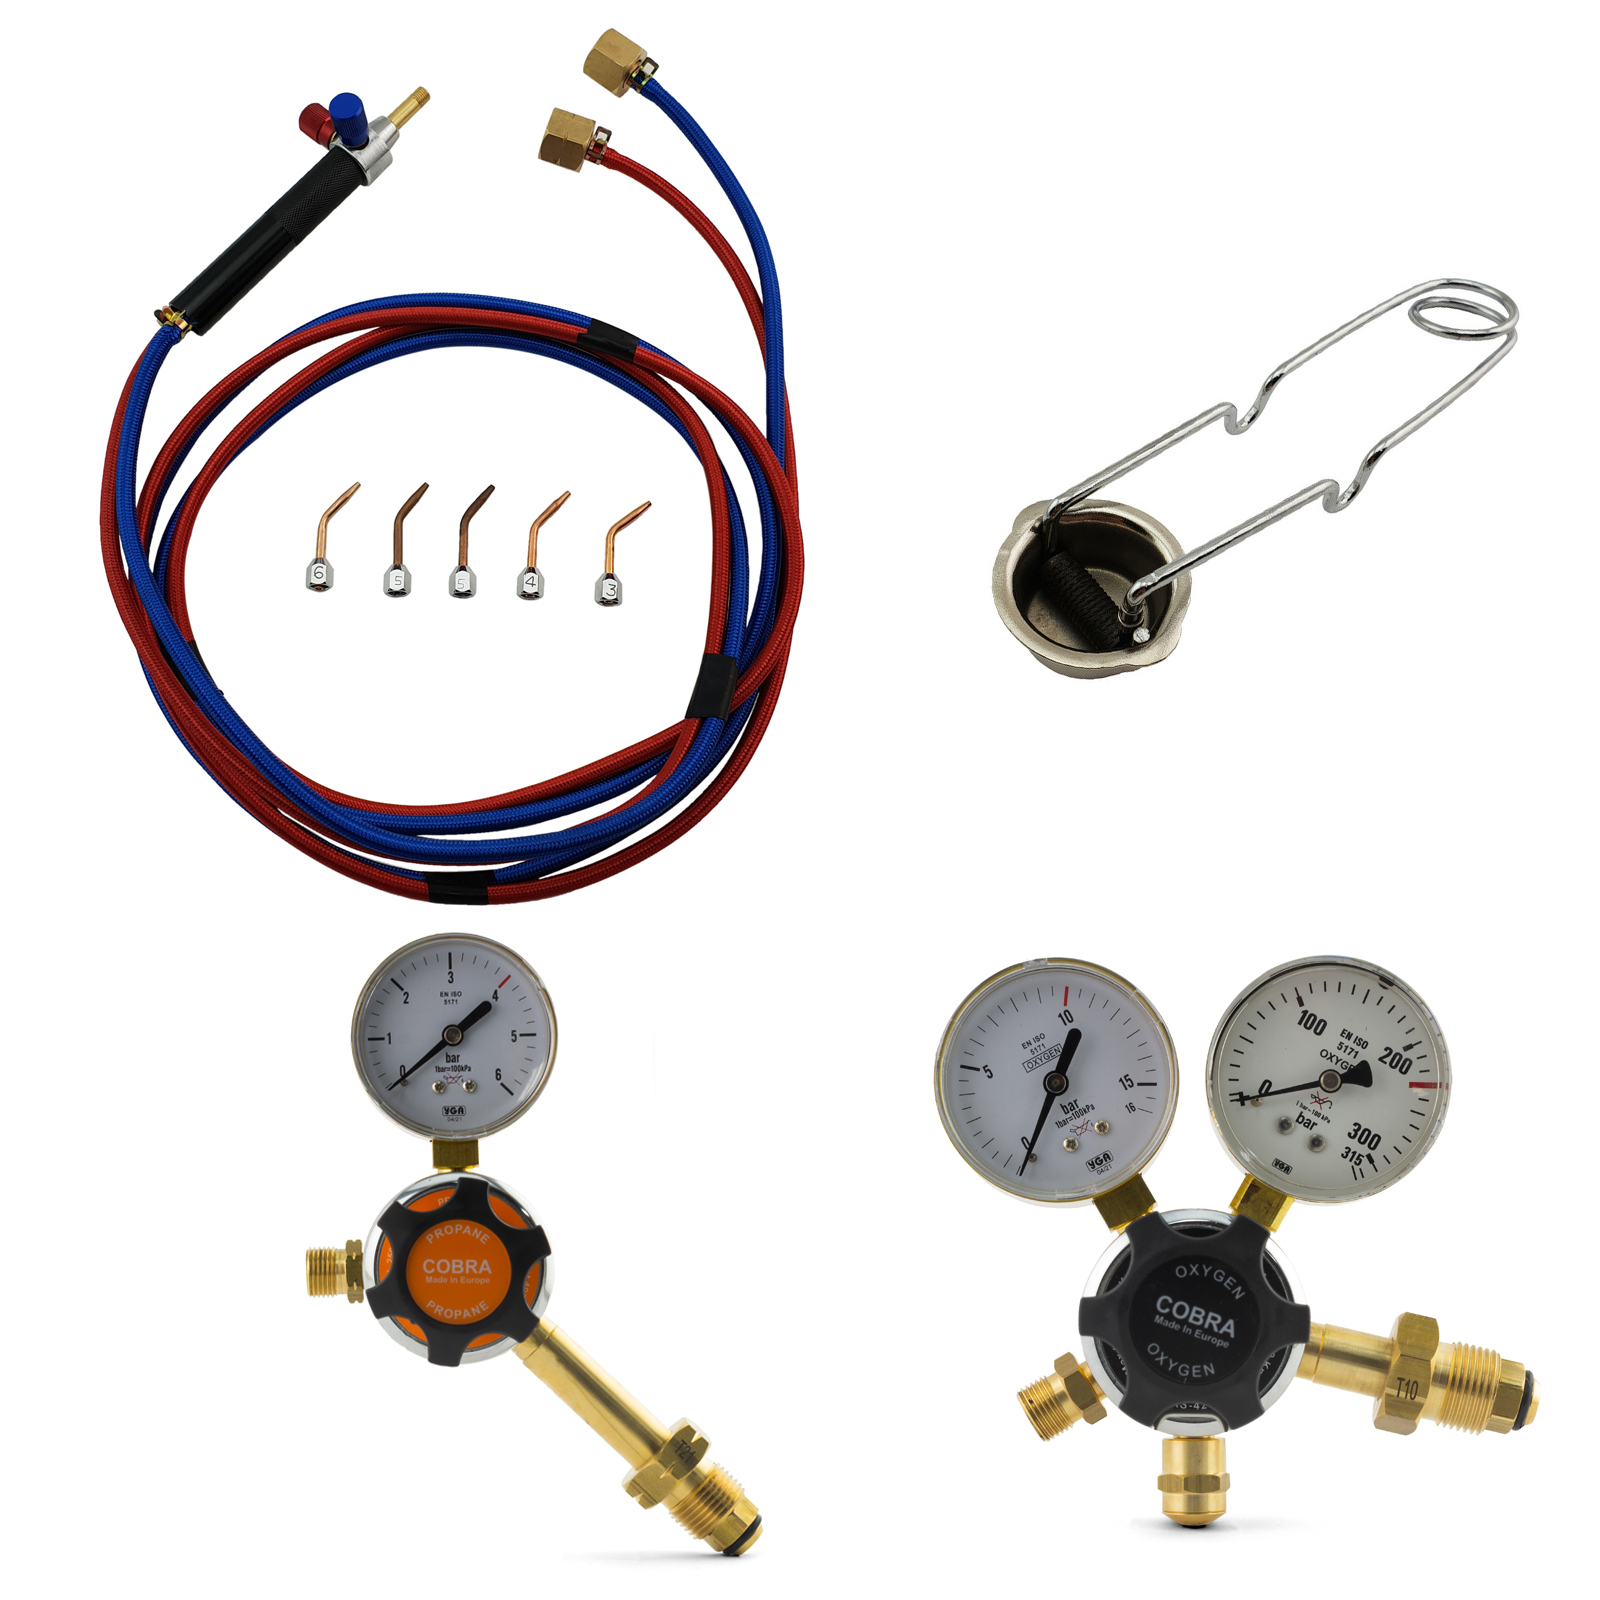 Smith Style Little Micro Torch Kit with Regulators to Suit LPG / Oxygen